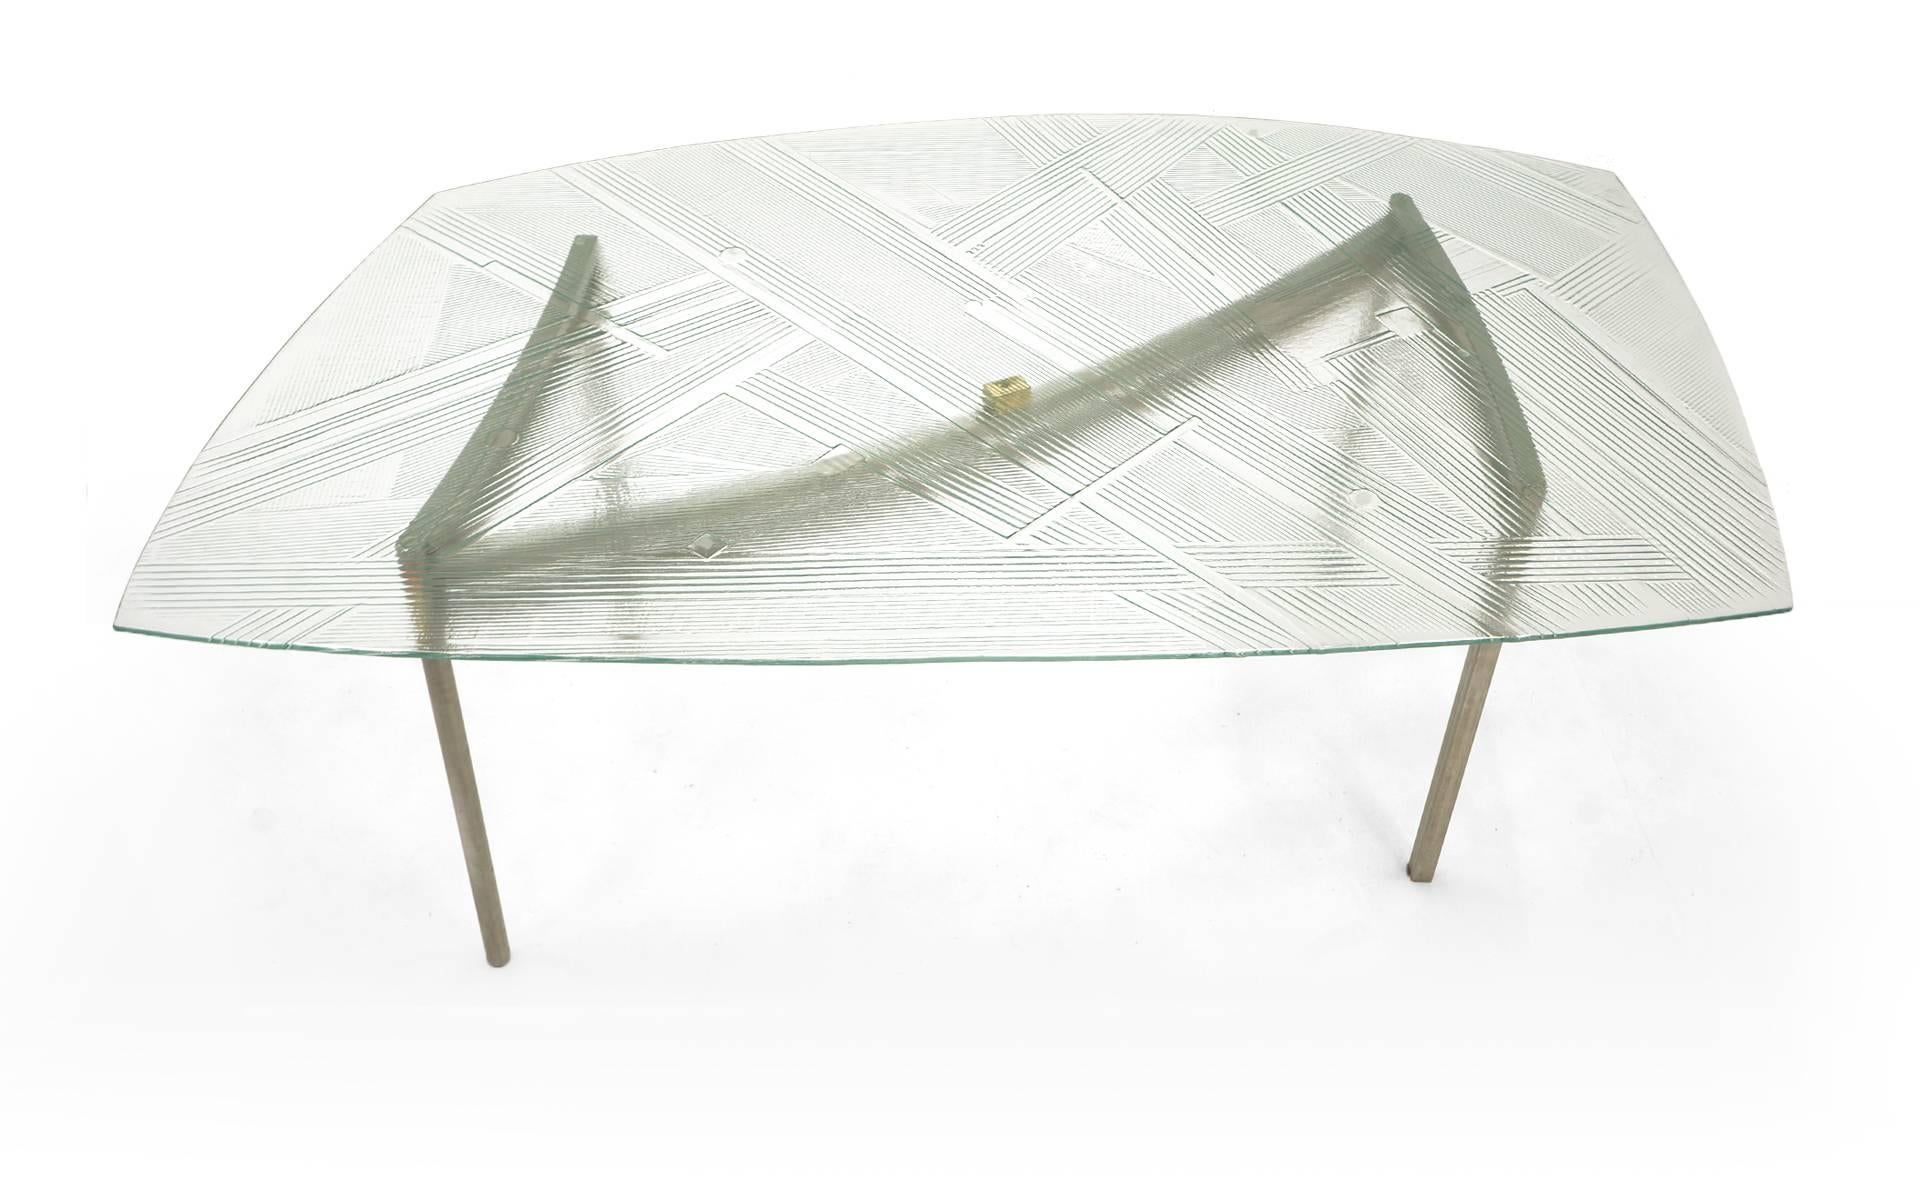 Unique, one of a kind art glass dining table. Tabletop is smooth on top side with designs in the glass on the underside. Substantially thick, but not cumbersome. The glass tope sits on the custom designed aluminum base with small brass square that